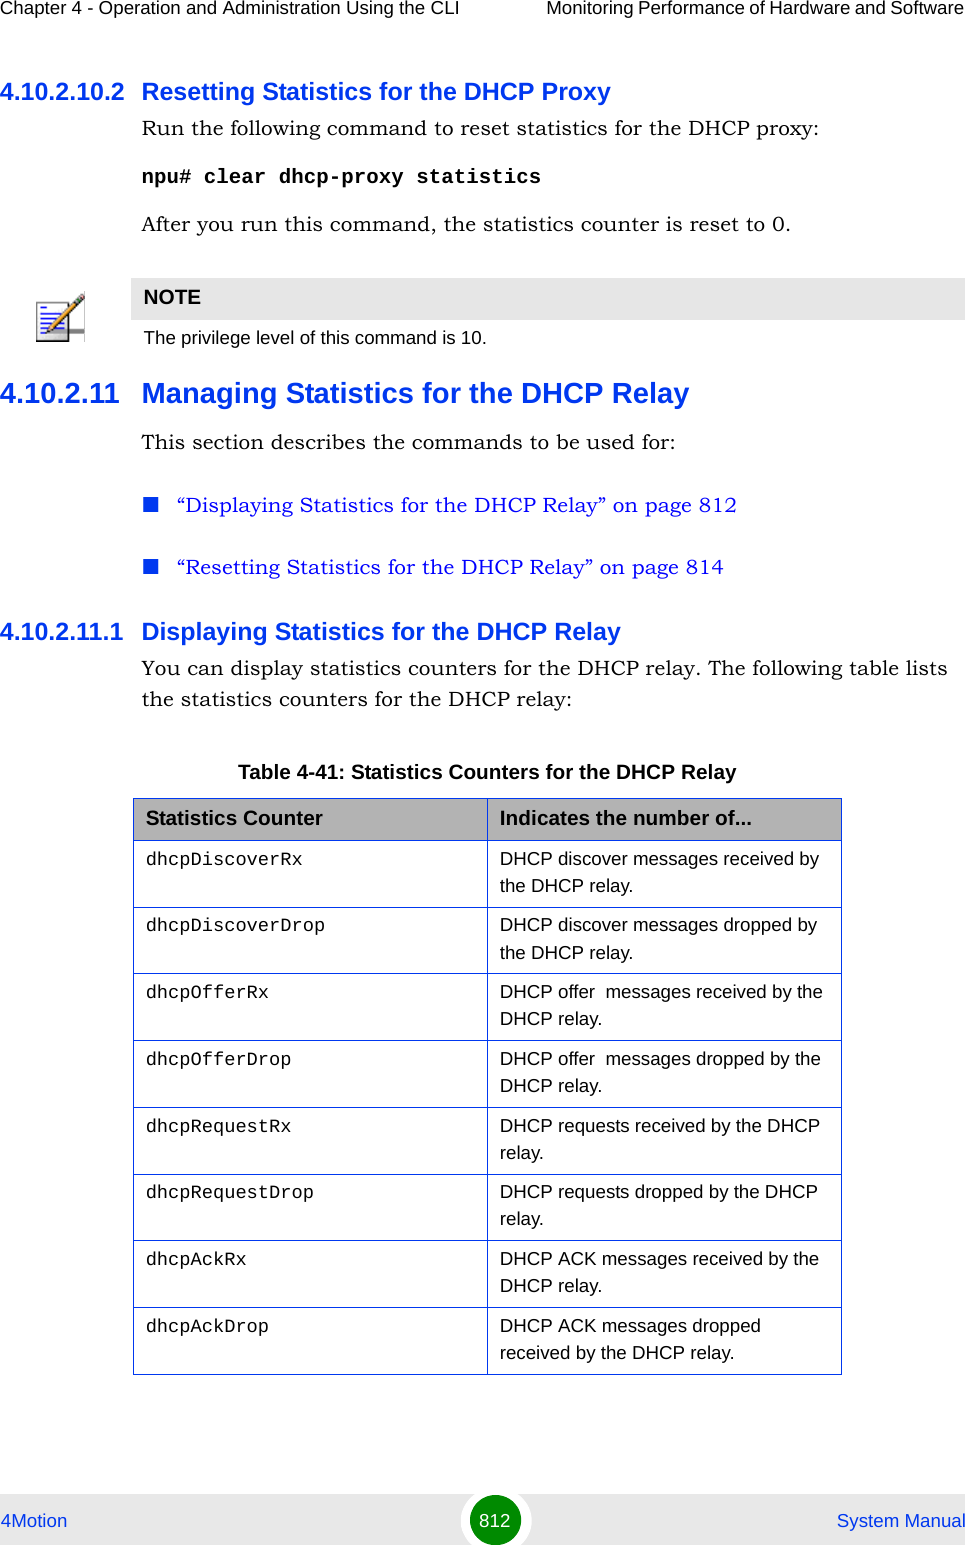 Chapter 4 - Operation and Administration Using the CLI Monitoring Performance of Hardware and Software 4Motion 812  System Manual4.10.2.10.2 Resetting Statistics for the DHCP ProxyRun the following command to reset statistics for the DHCP proxy:npu# clear dhcp-proxy statisticsAfter you run this command, the statistics counter is reset to 0. 4.10.2.11 Managing Statistics for the DHCP RelayThis section describes the commands to be used for:“Displaying Statistics for the DHCP Relay” on page 812“Resetting Statistics for the DHCP Relay” on page 8144.10.2.11.1 Displaying Statistics for the DHCP RelayYou can display statistics counters for the DHCP relay. The following table lists the statistics counters for the DHCP relay:NOTEThe privilege level of this command is 10.Table 4-41: Statistics Counters for the DHCP RelayStatistics Counter Indicates the number of...dhcpDiscoverRx DHCP discover messages received by the DHCP relay.dhcpDiscoverDrop DHCP discover messages dropped by the DHCP relay.dhcpOfferRx DHCP offer  messages received by the DHCP relay.dhcpOfferDrop DHCP offer  messages dropped by the DHCP relay.dhcpRequestRx DHCP requests received by the DHCP relay.dhcpRequestDrop DHCP requests dropped by the DHCP relay.dhcpAckRx DHCP ACK messages received by the DHCP relay.dhcpAckDrop DHCP ACK messages dropped received by the DHCP relay.